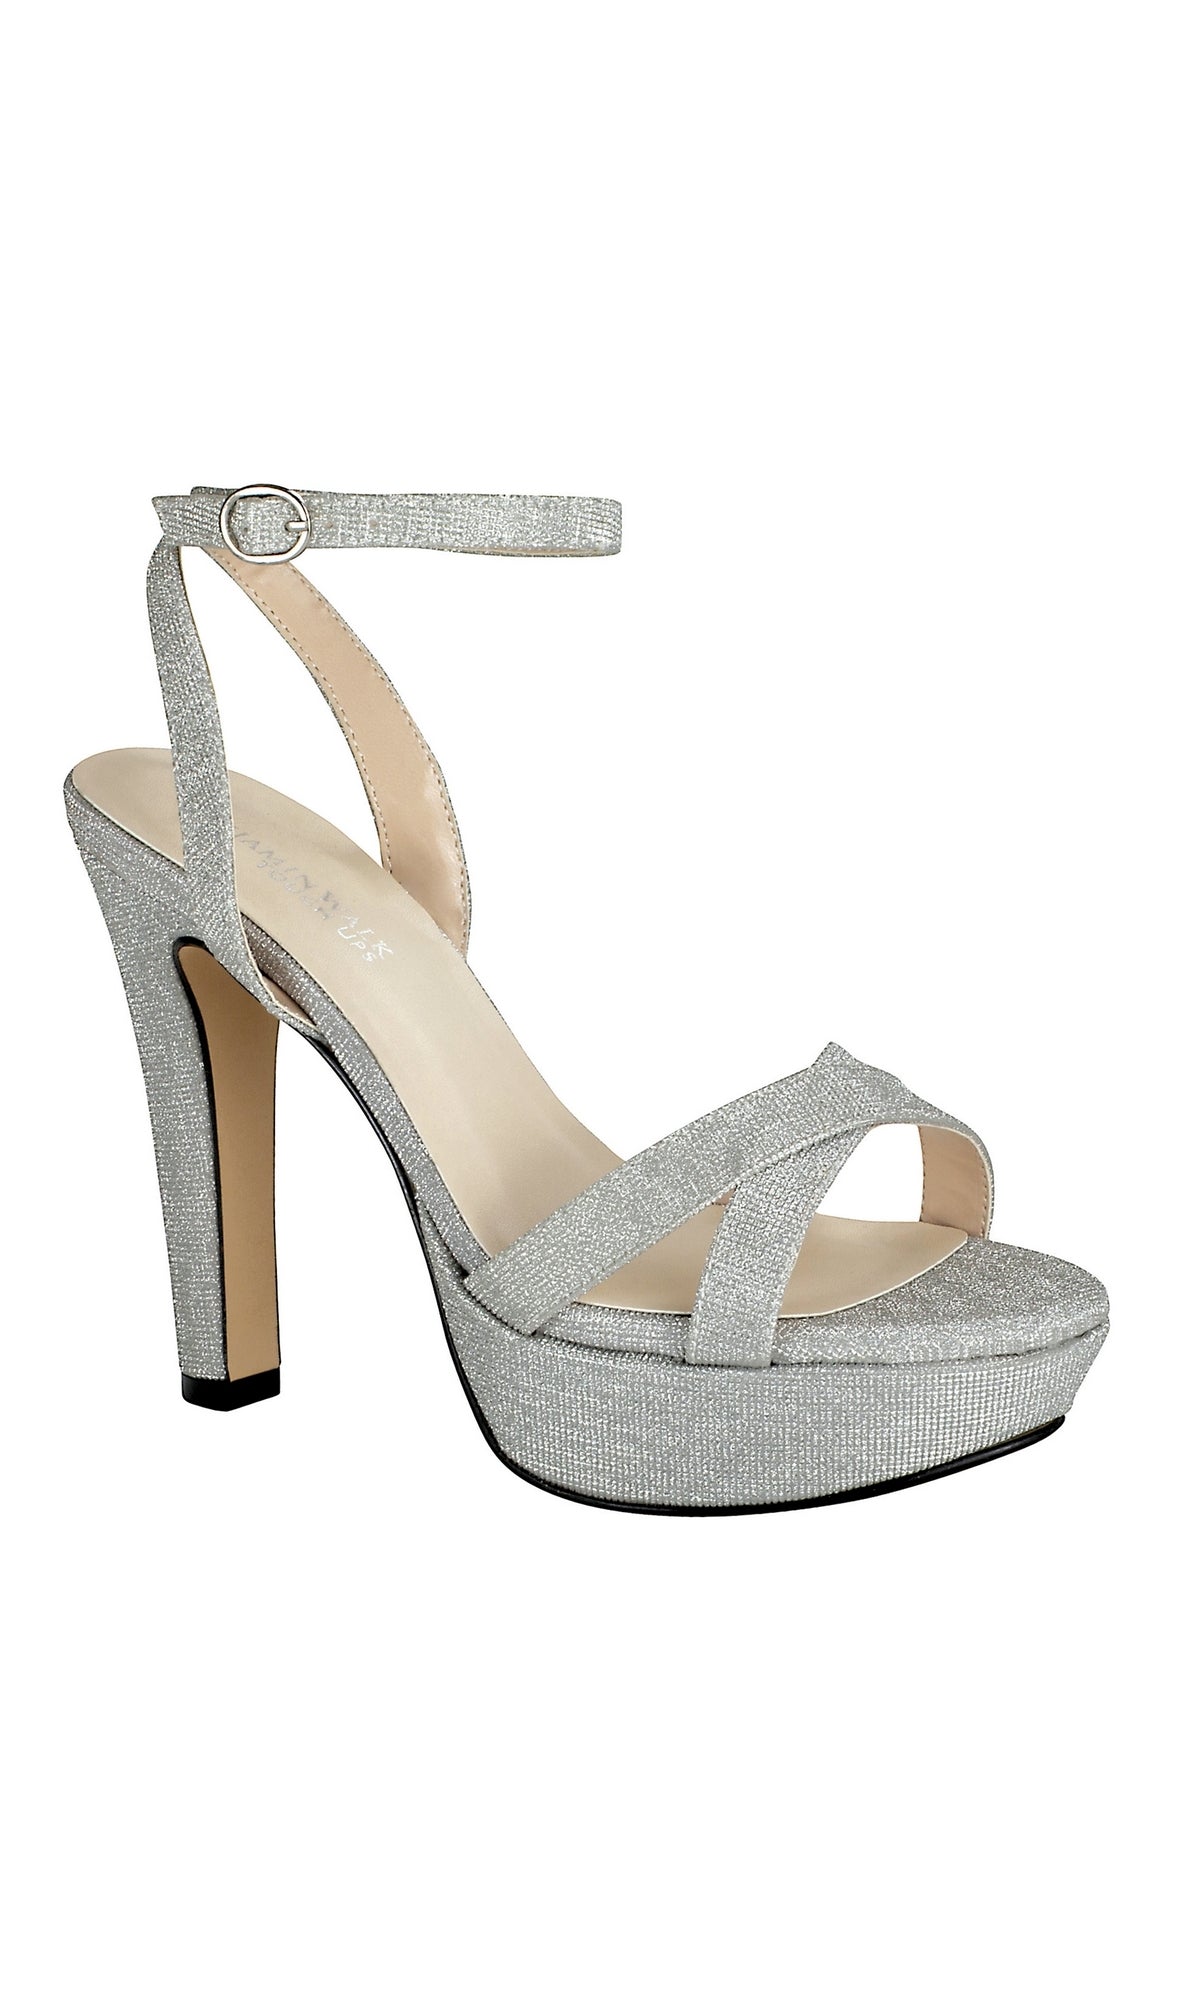 Elena Silver High Heel Prom Shoes by Touch Ups 4548